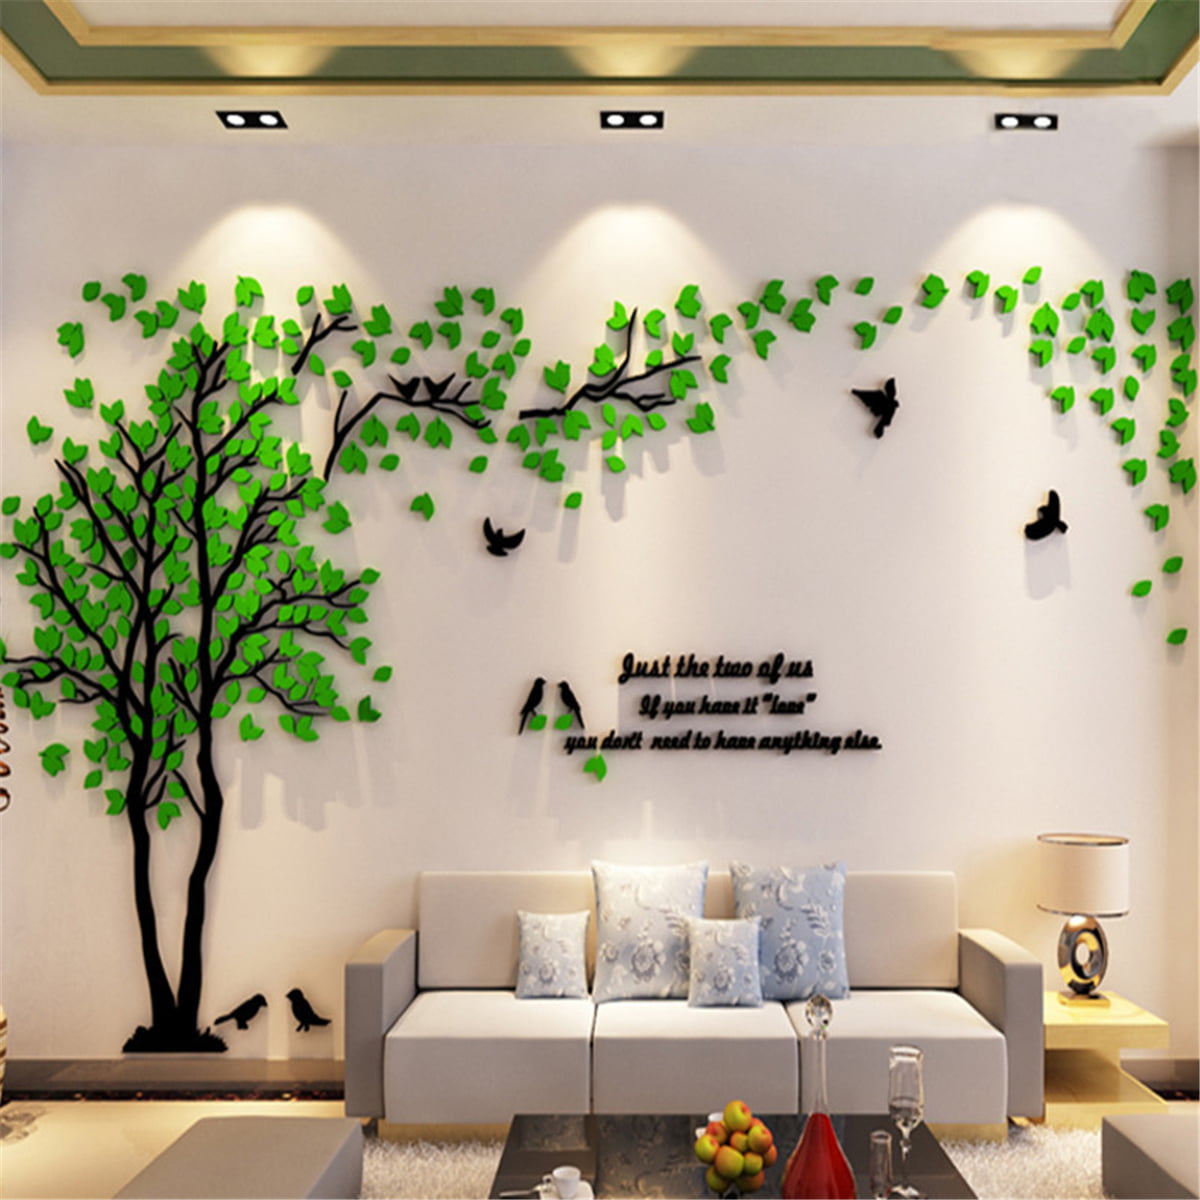 3D DIY Picture Frame Tree Carved Wall Sticker Removable Art Vinyl Wall Decal Home Sticker Mural Home Decor 